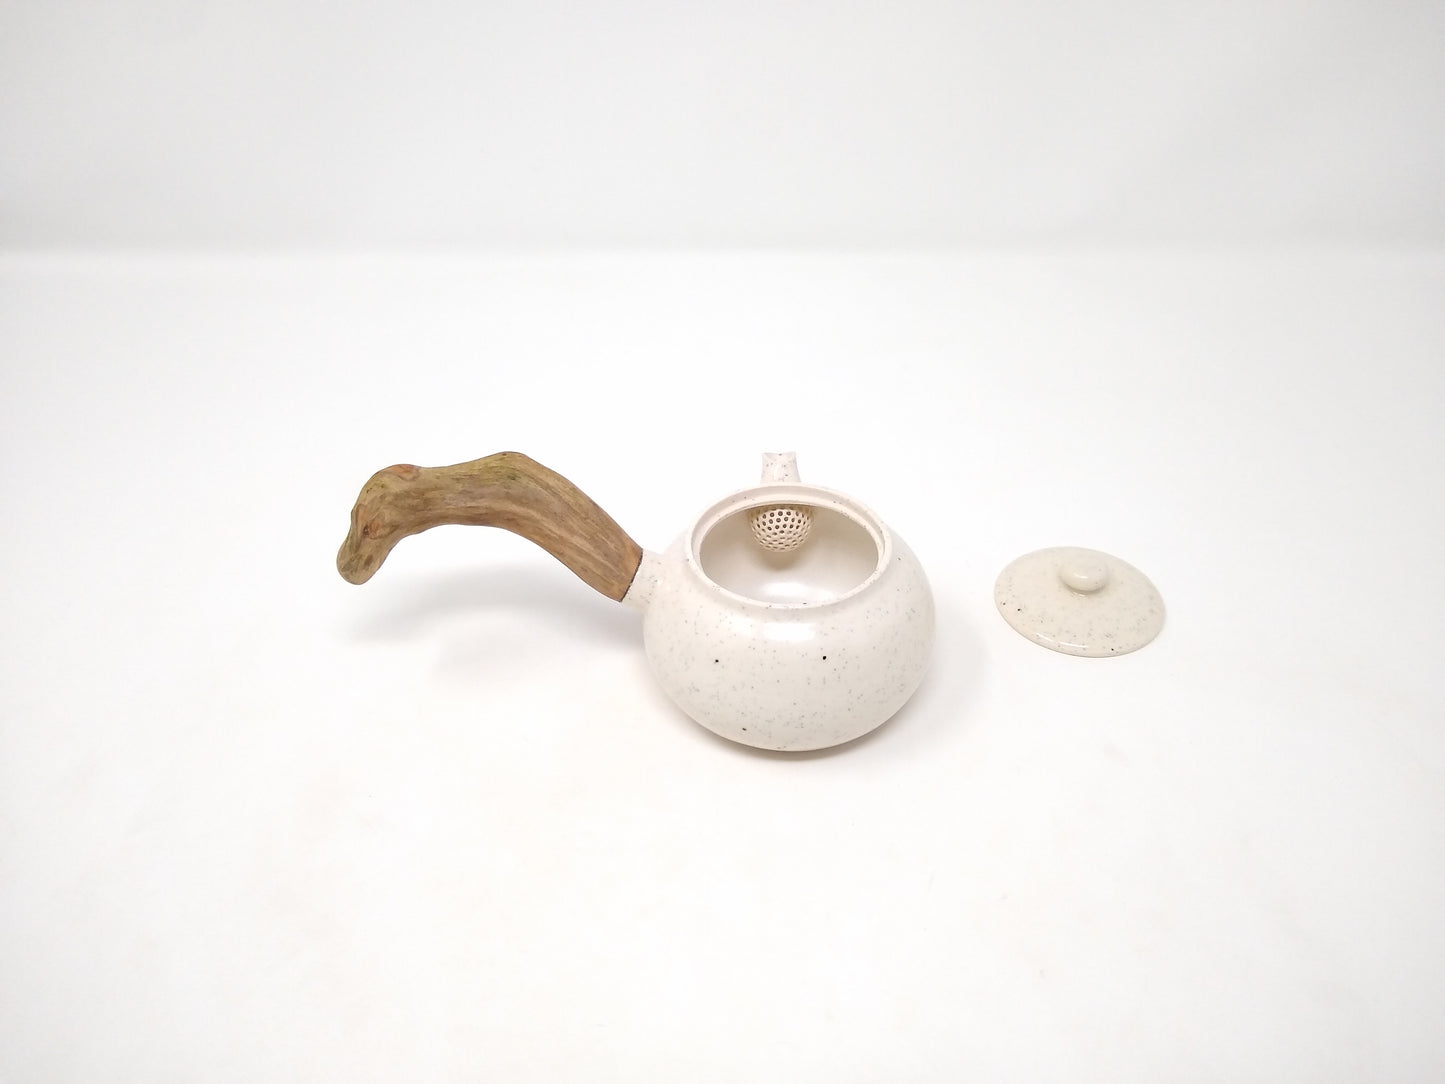 160ml Speckled Porcelain Kyusu with a matching 190ml tea bowl